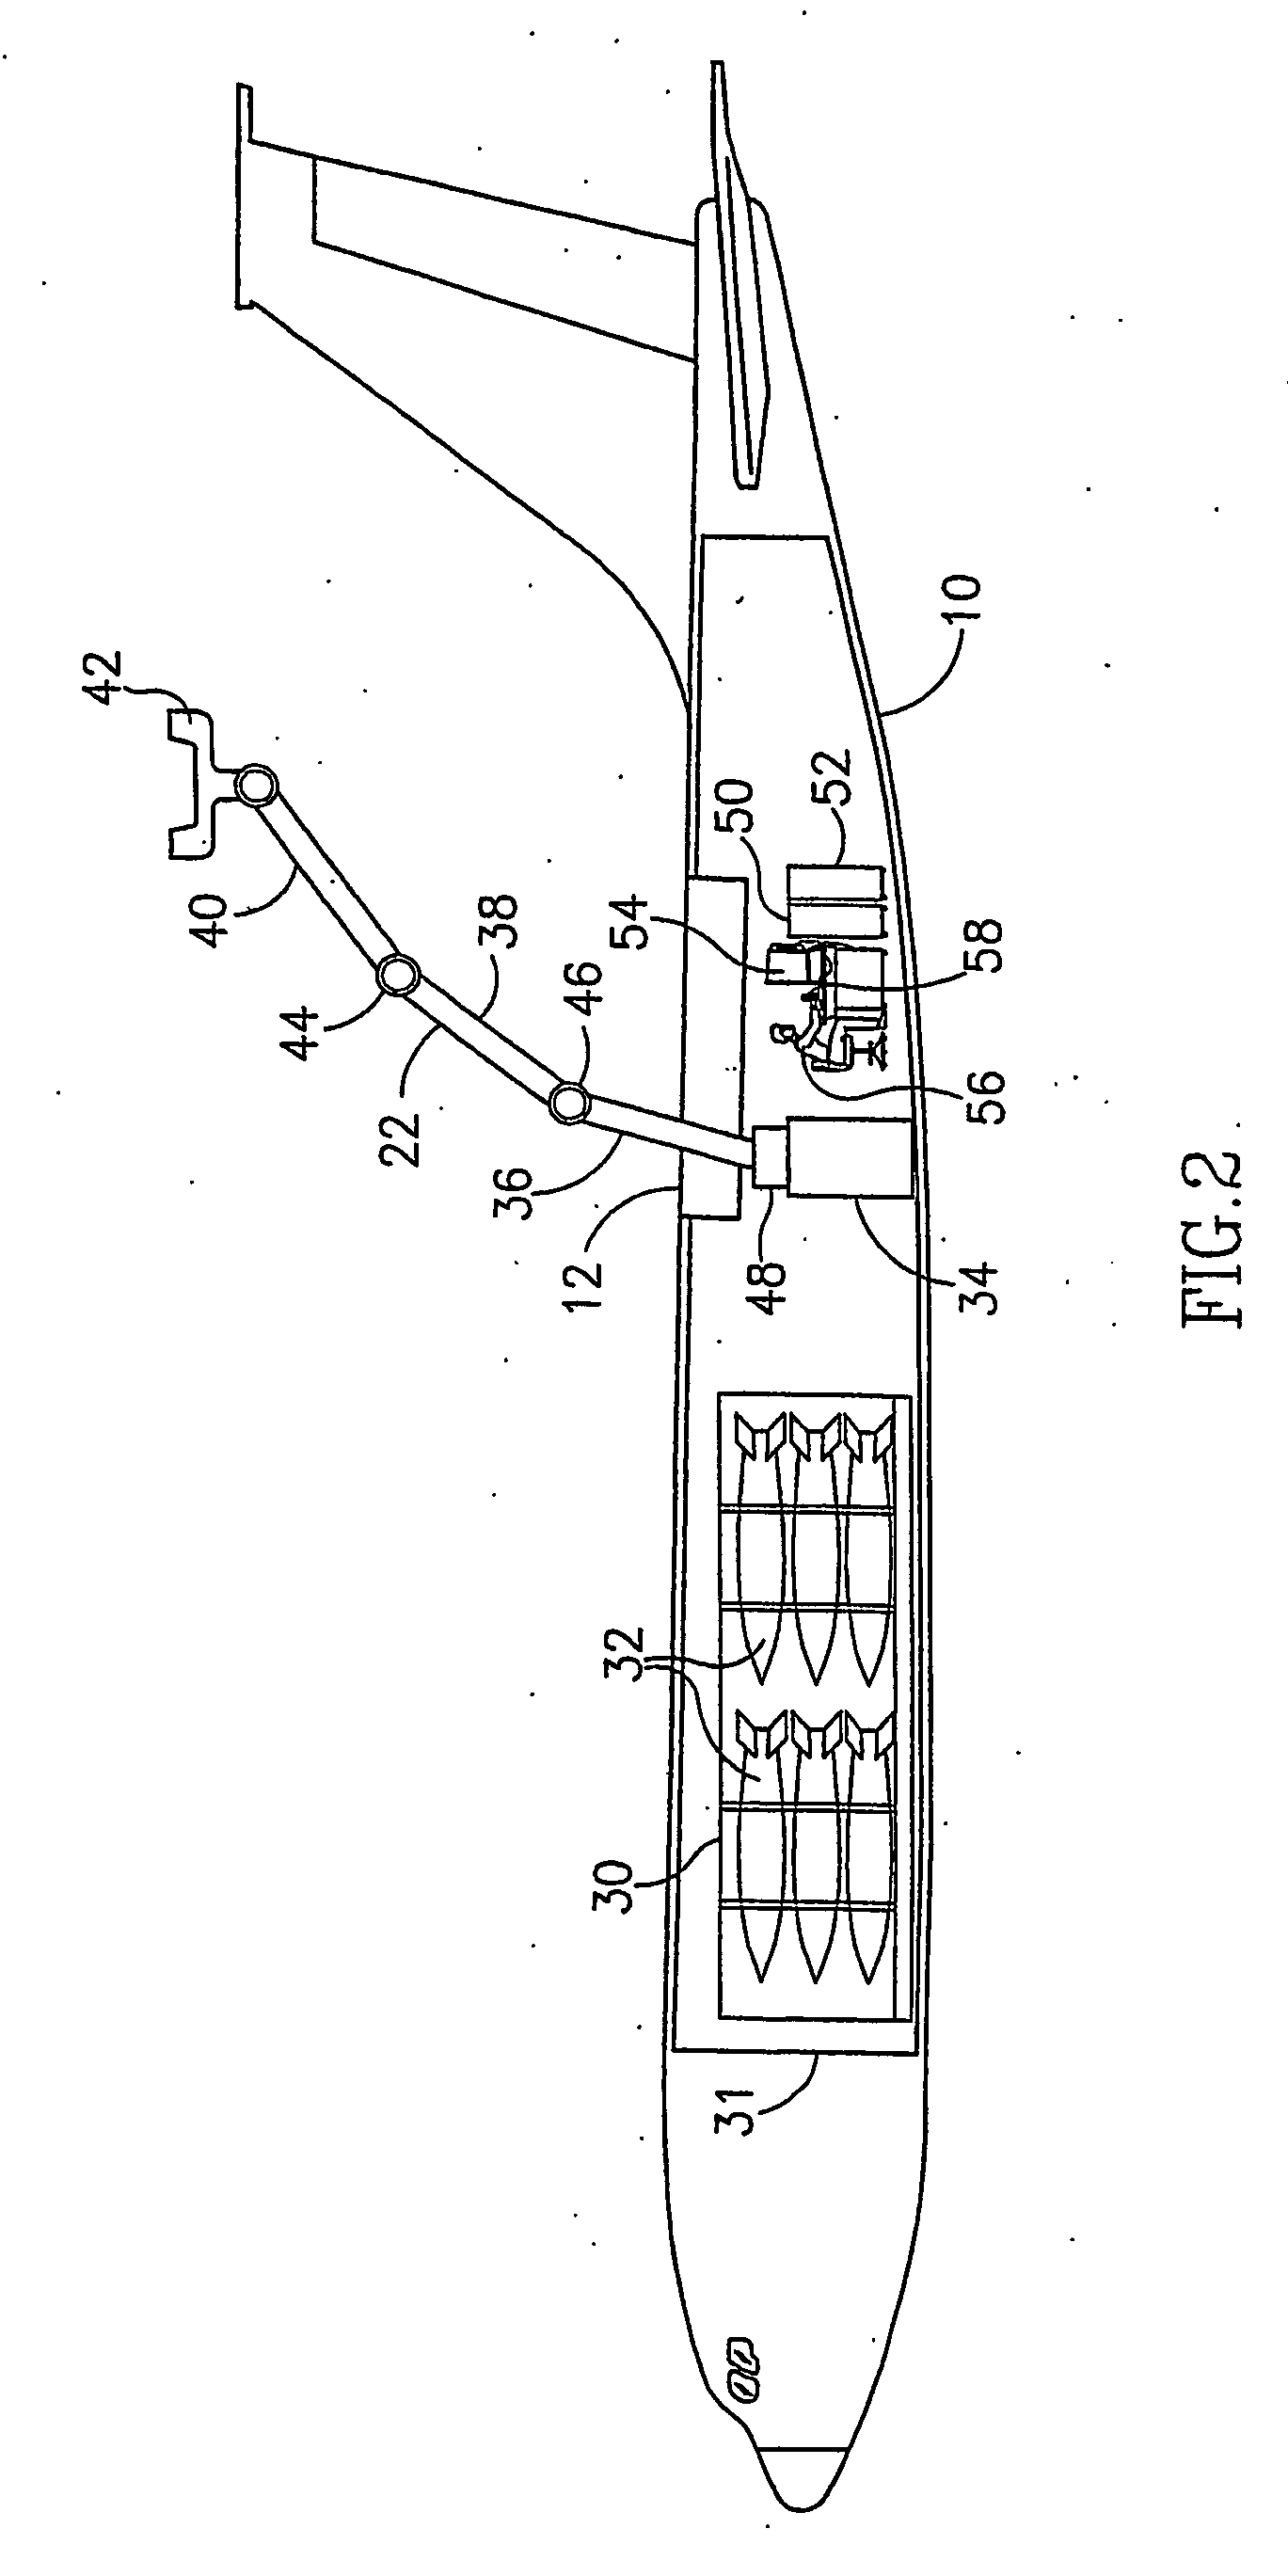 Apparatus and method for air-to-air arming of aerial vehicles